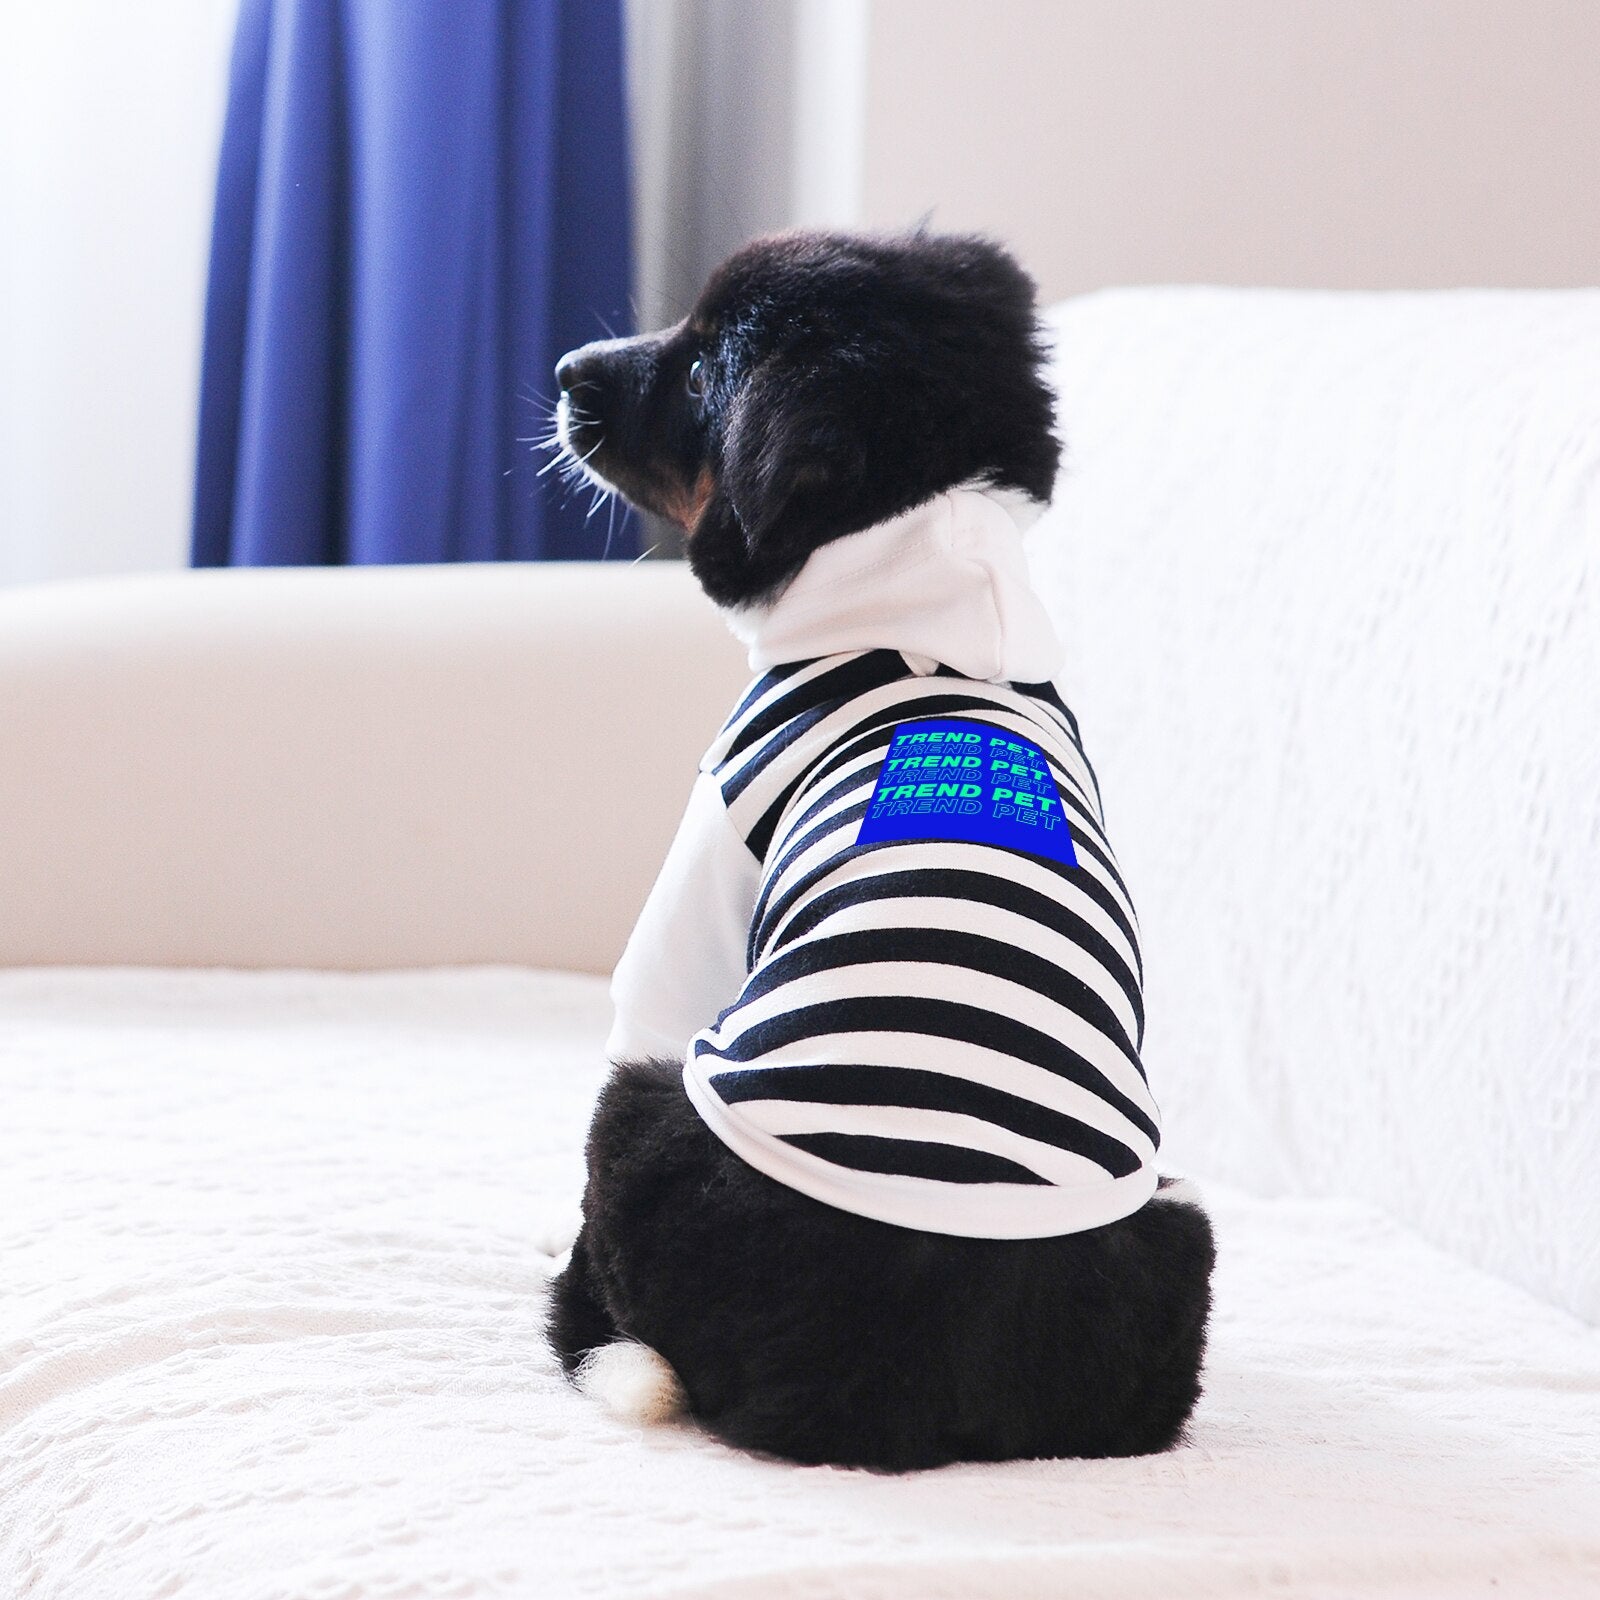 Stylish Pet Clothes Hoodie in Red White Zebra Stripe, Soft Cotton Fabric and Good Quality, Classic and Cool, Leash Hole Design